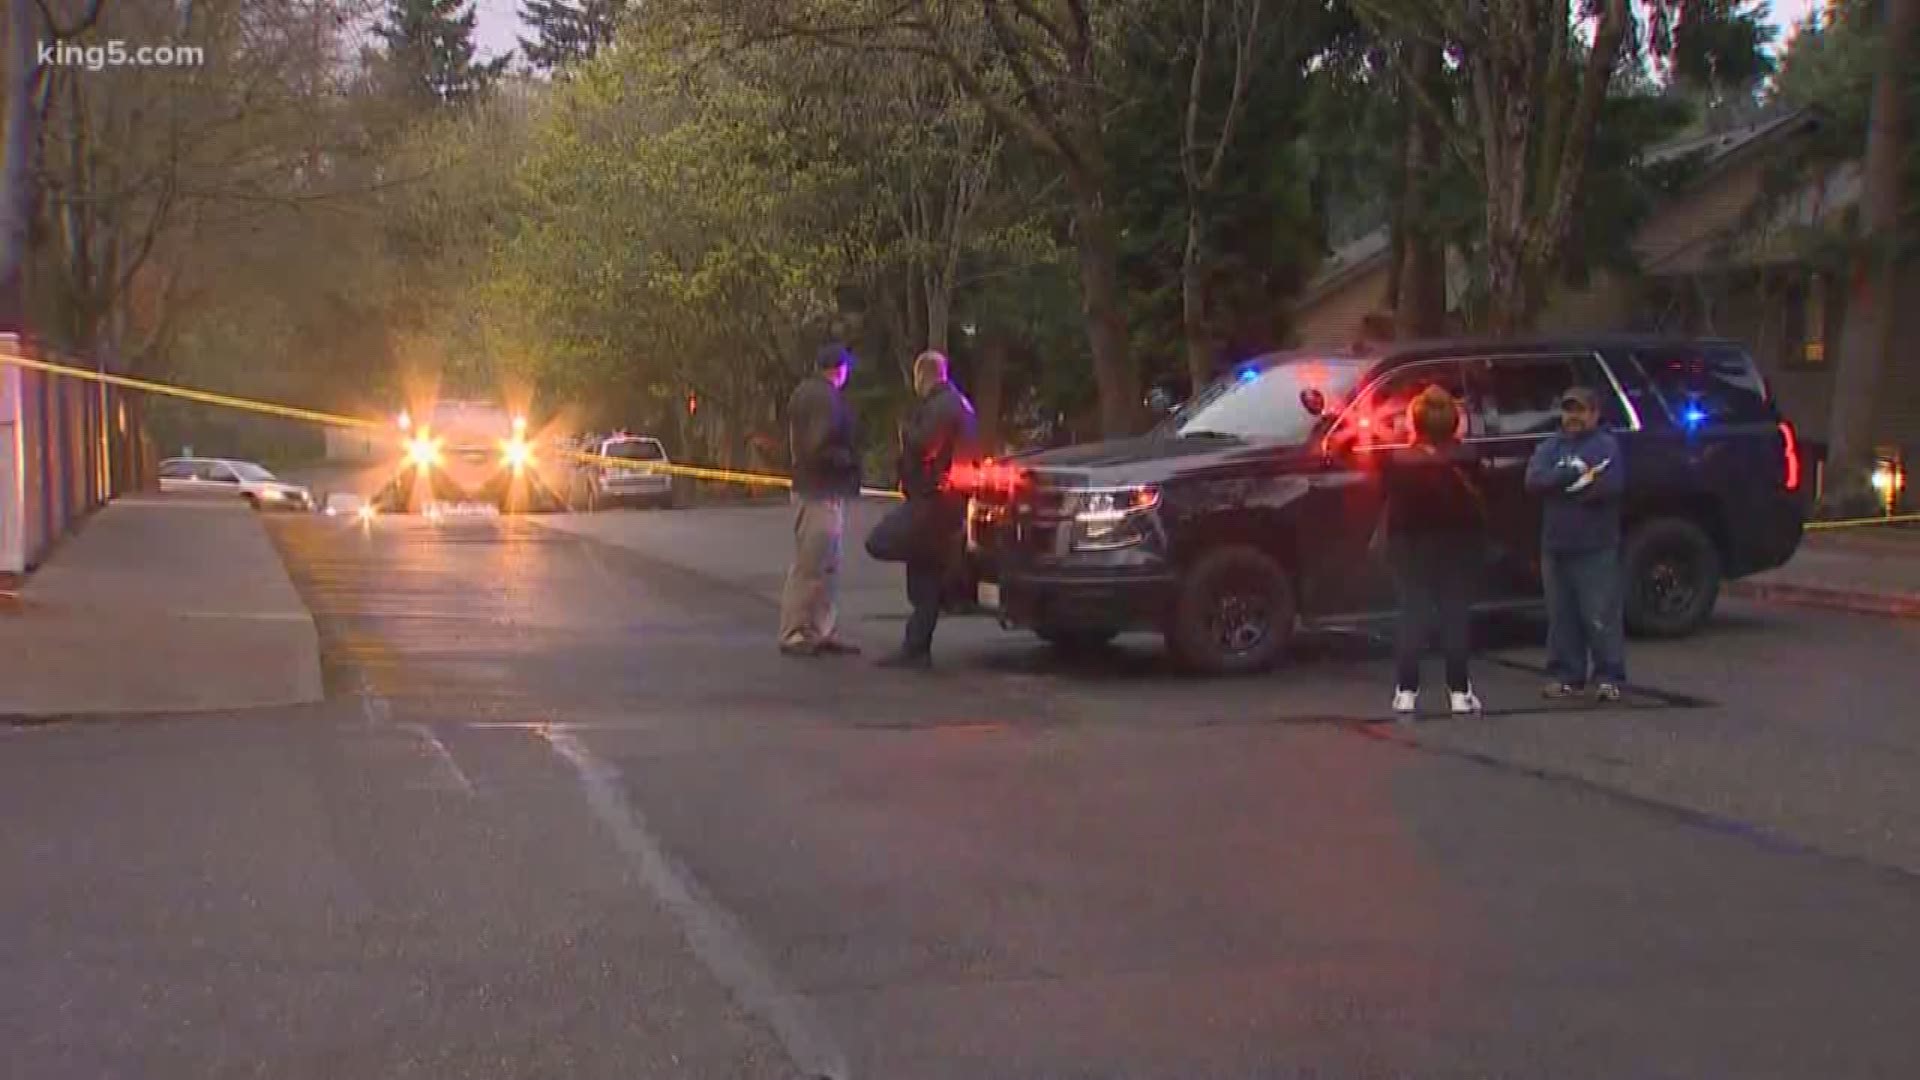 The murder of Josue Flores, 18, in April of this year was the first homicide in Bellevue in more than three years, police said. Investigators announced four arrests.